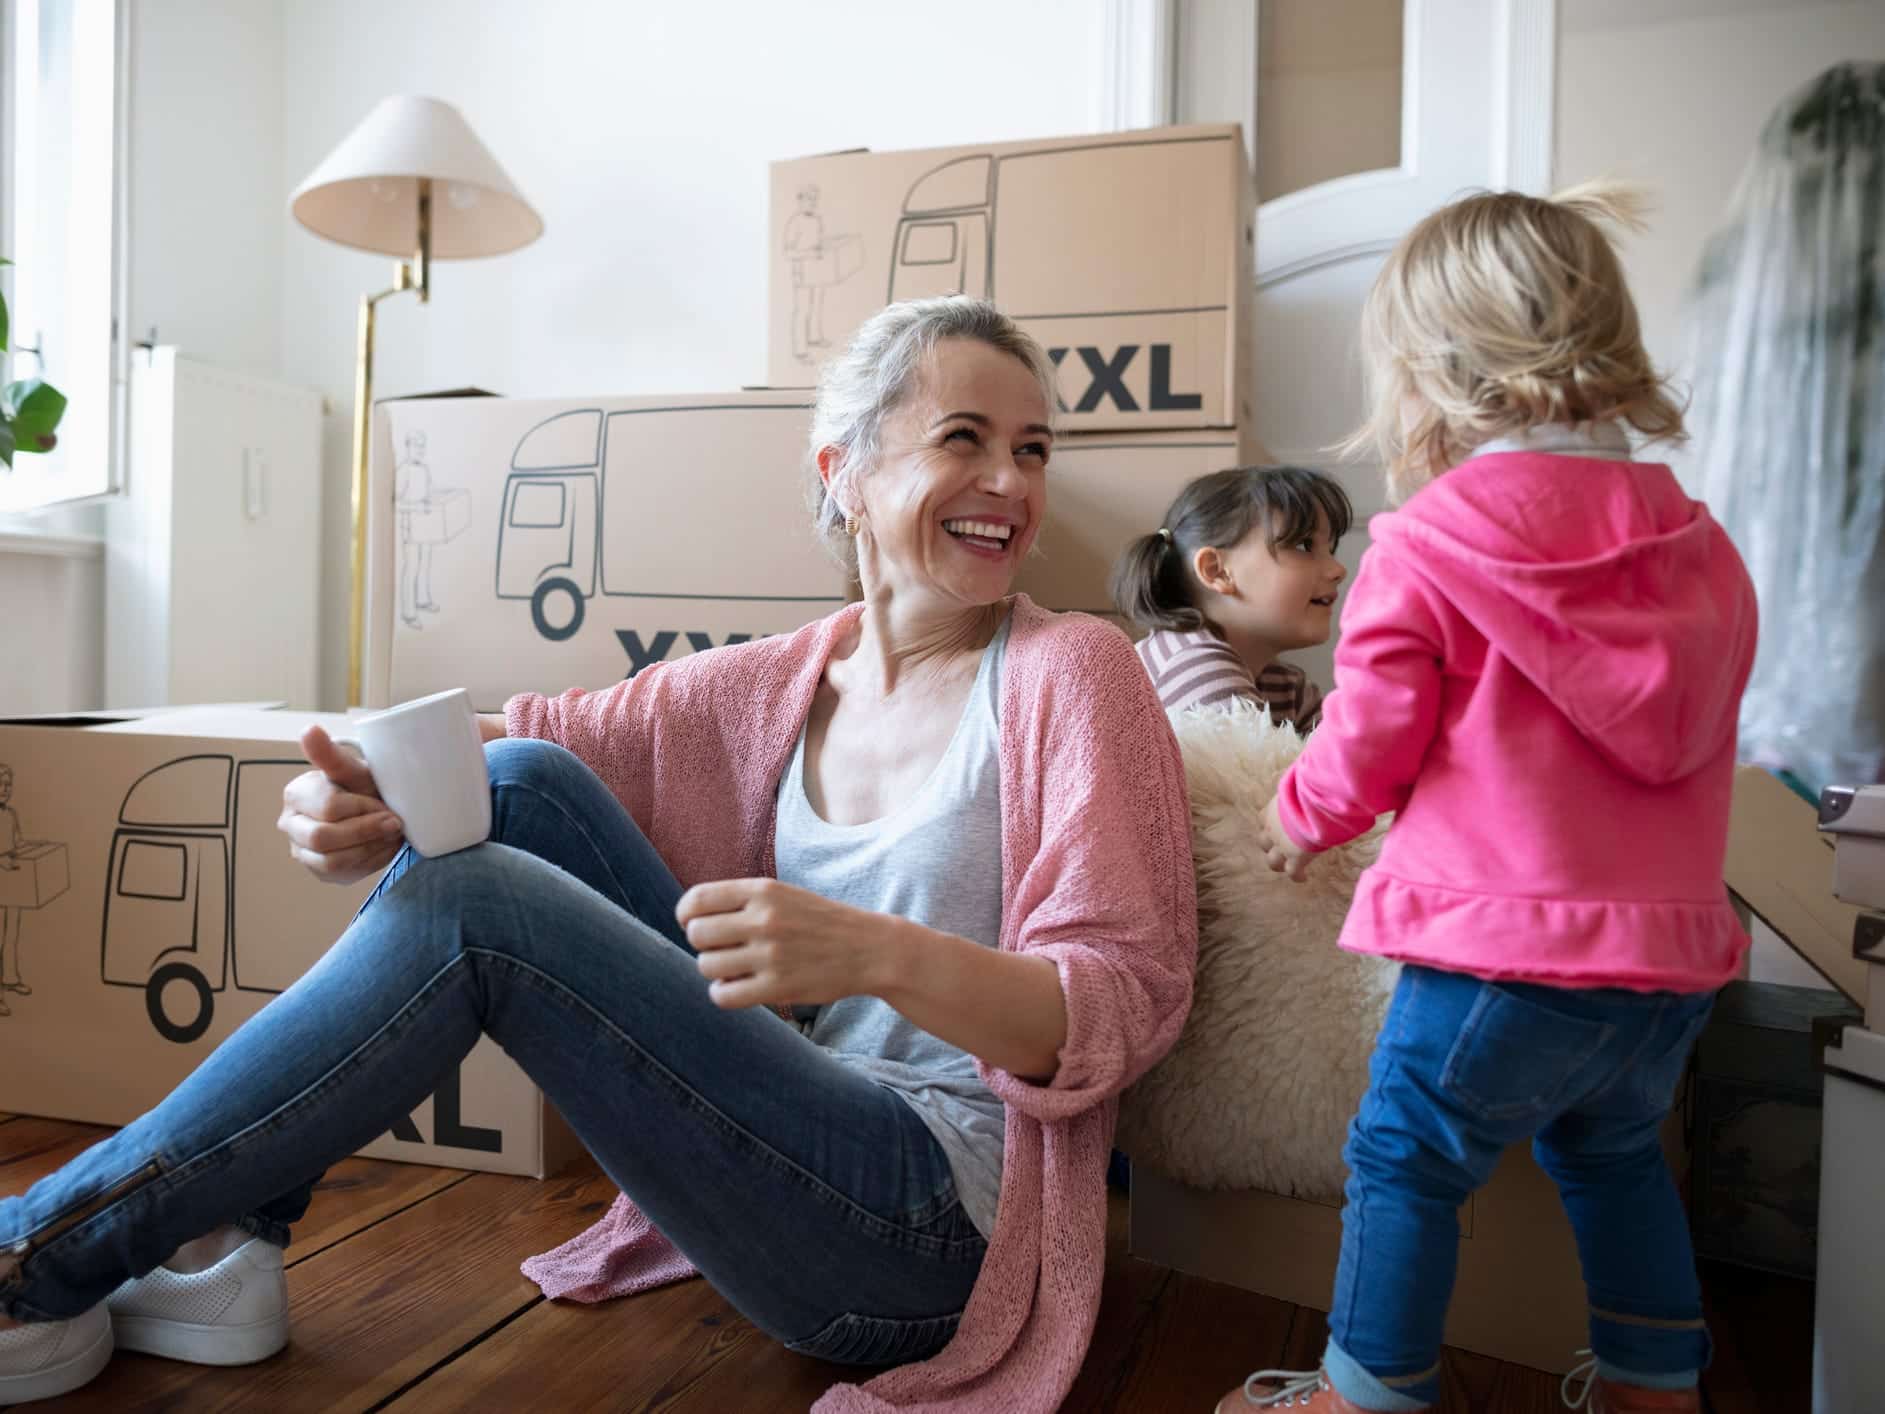 11 Things To Do Before You Downsize Your Home According To An Expert Who Gets Hired By Seniors